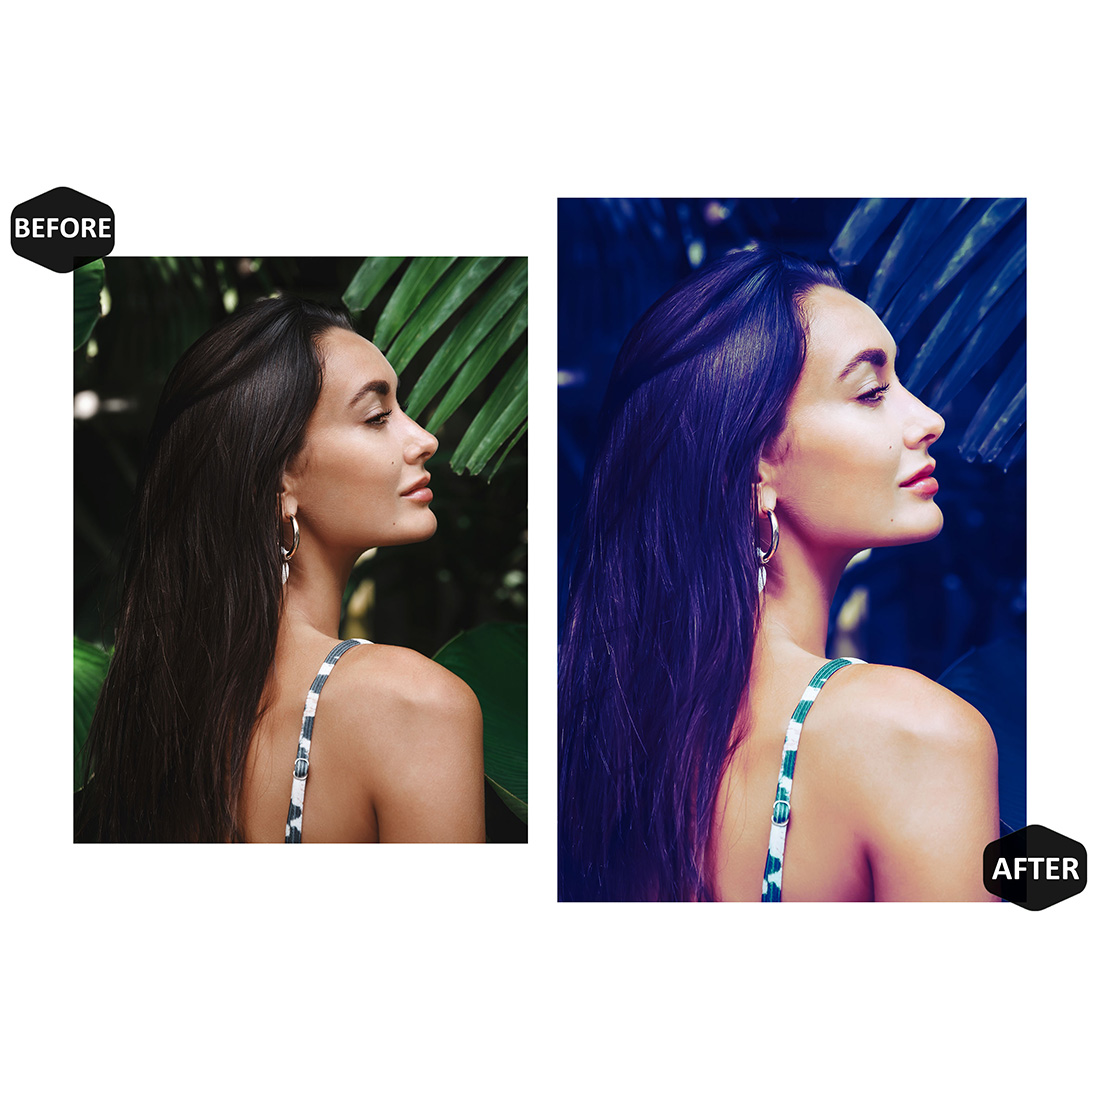 12 Photoshop Actions, Sapphire Ps Action, Blue dark ACR Preset, jungle Ps Filter, Portrait And Lifestyle Theme For Instagram, Blogger preview image.